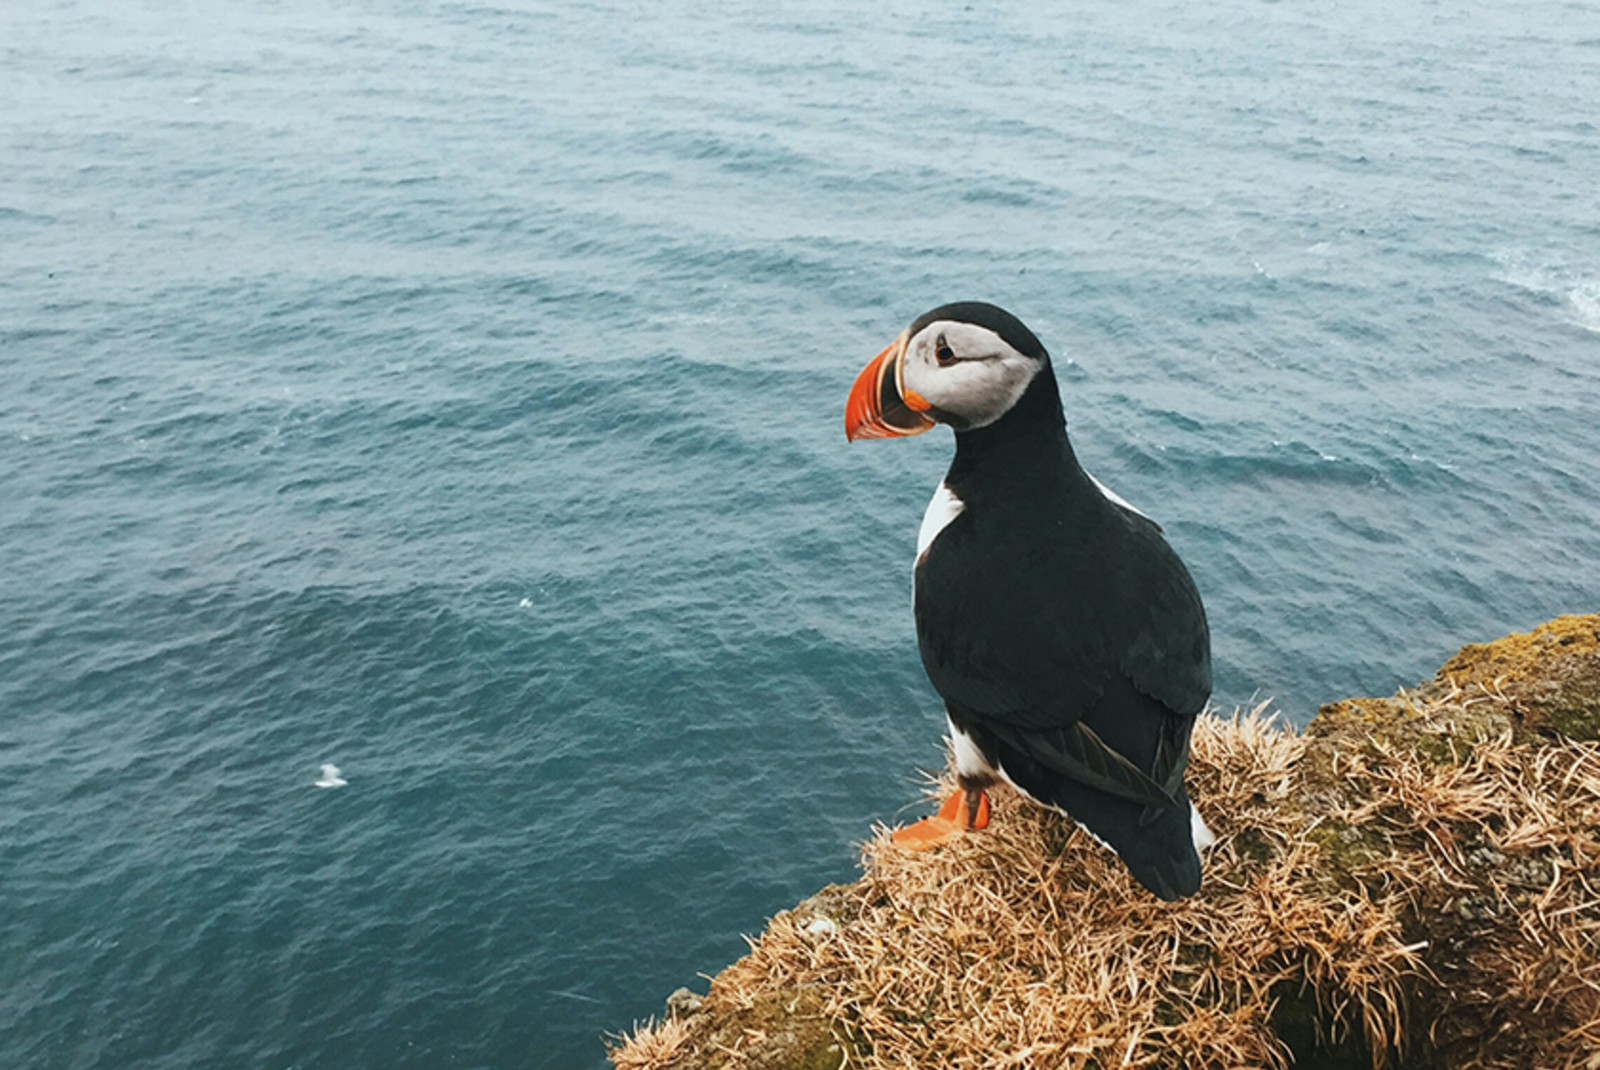 A white, brown and black puffin bird overlooking the ocean in Iceland